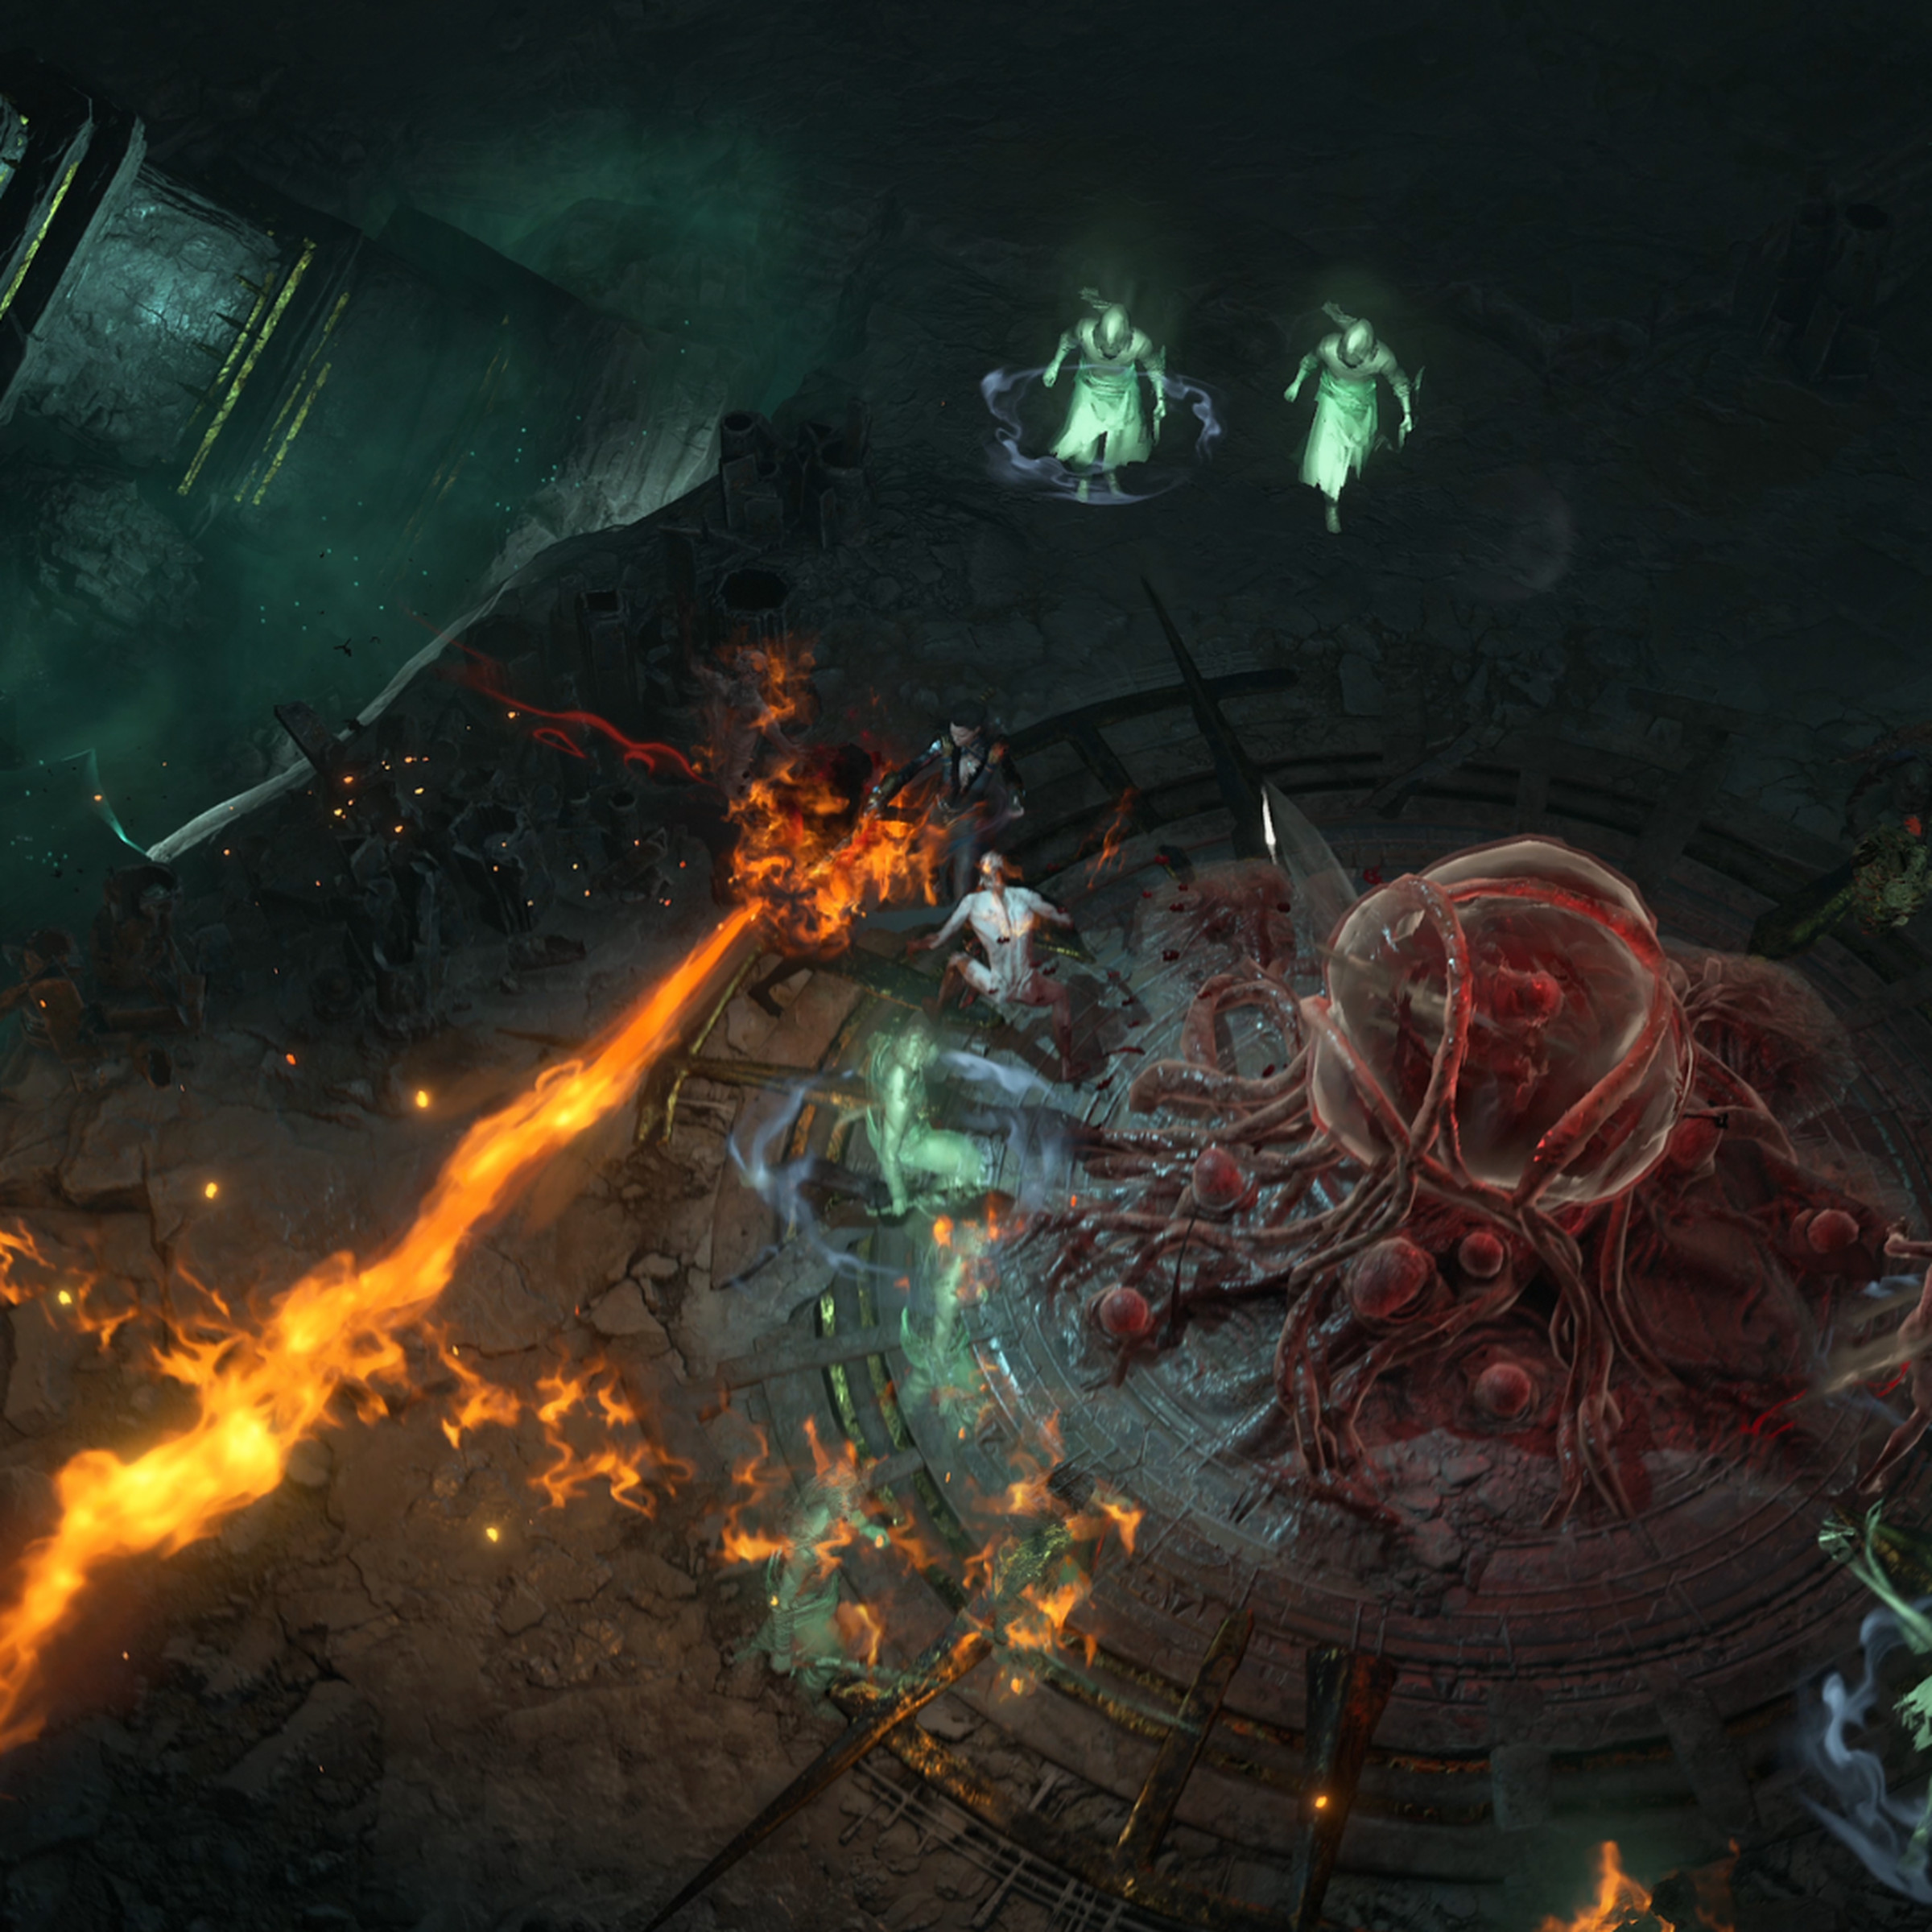 Screenshot from Diablo IV featuring a top-down view of a dark dungeon with a bubbling flesh monster, spectral enemies, and a tongue of fire emanating from a monster.